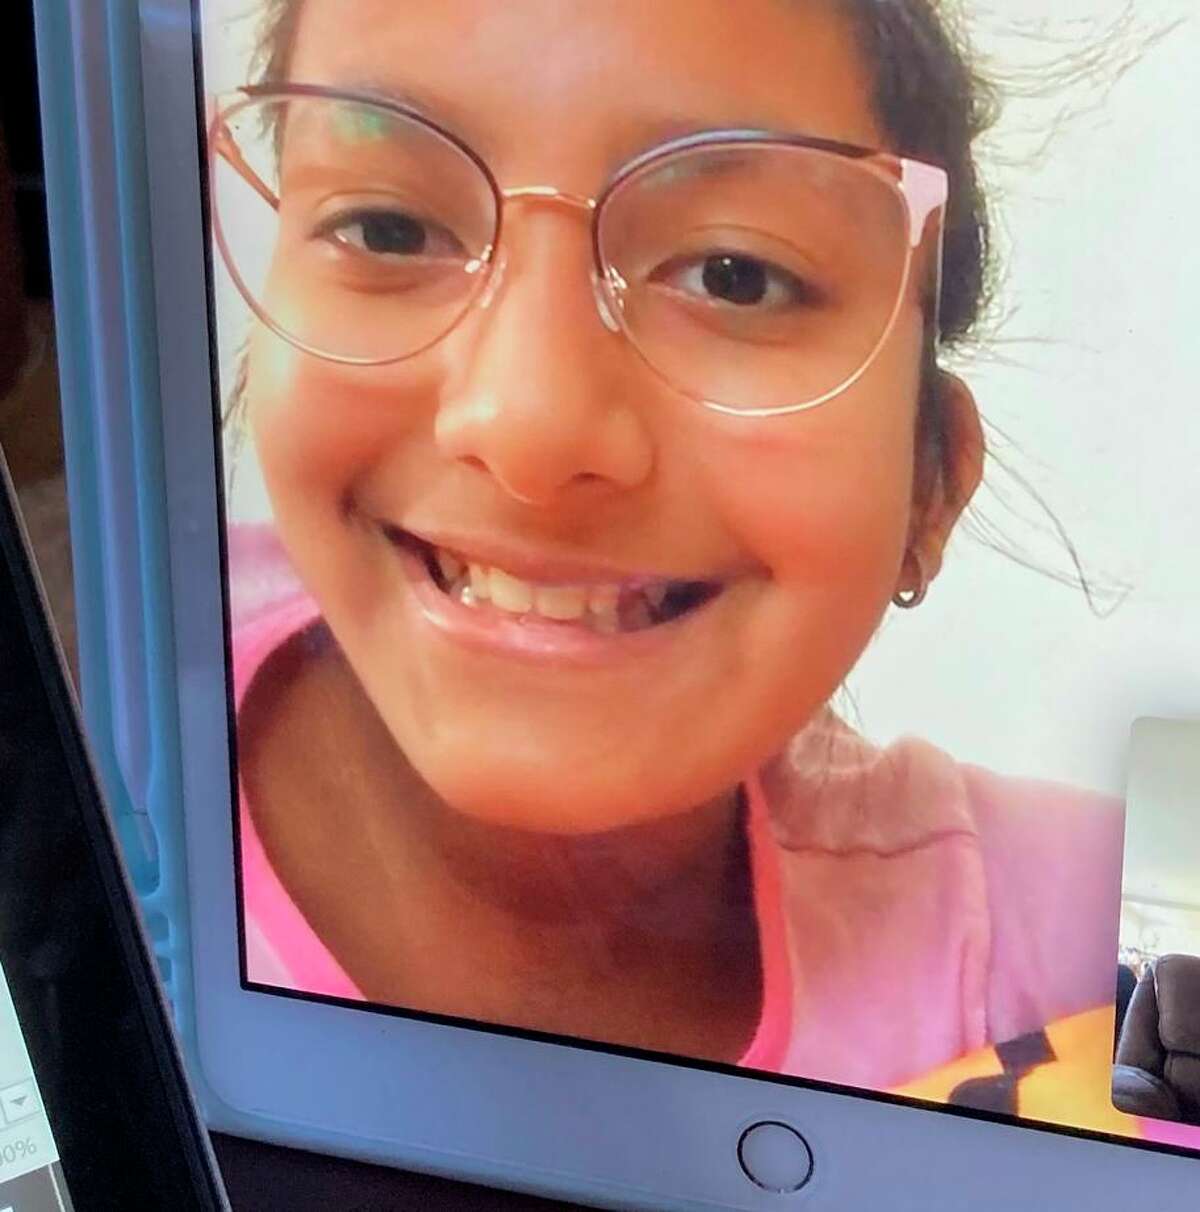 10-year-old Christa Prasadi chats with her best friend Shine Staples via FaceTime.  Christa often gives her friend a shoulder to lean on with Shine's long-term symptoms of COVID.